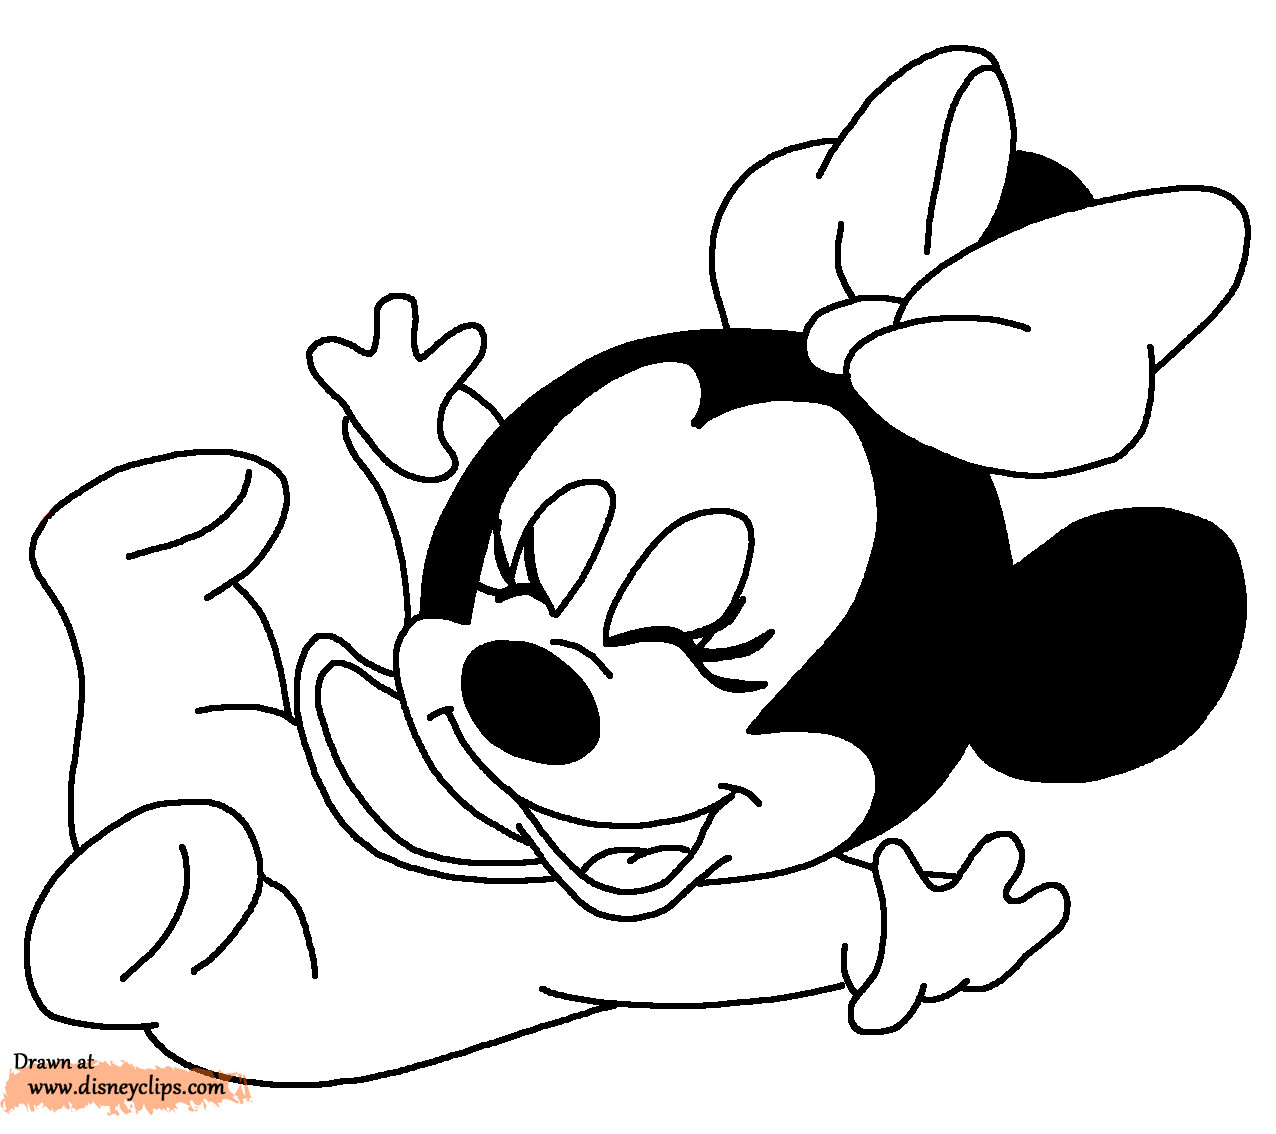 Baby Mickey Mouse Coloring Page
 Free Baby Mickey Mouse Coloring Pages High Quality